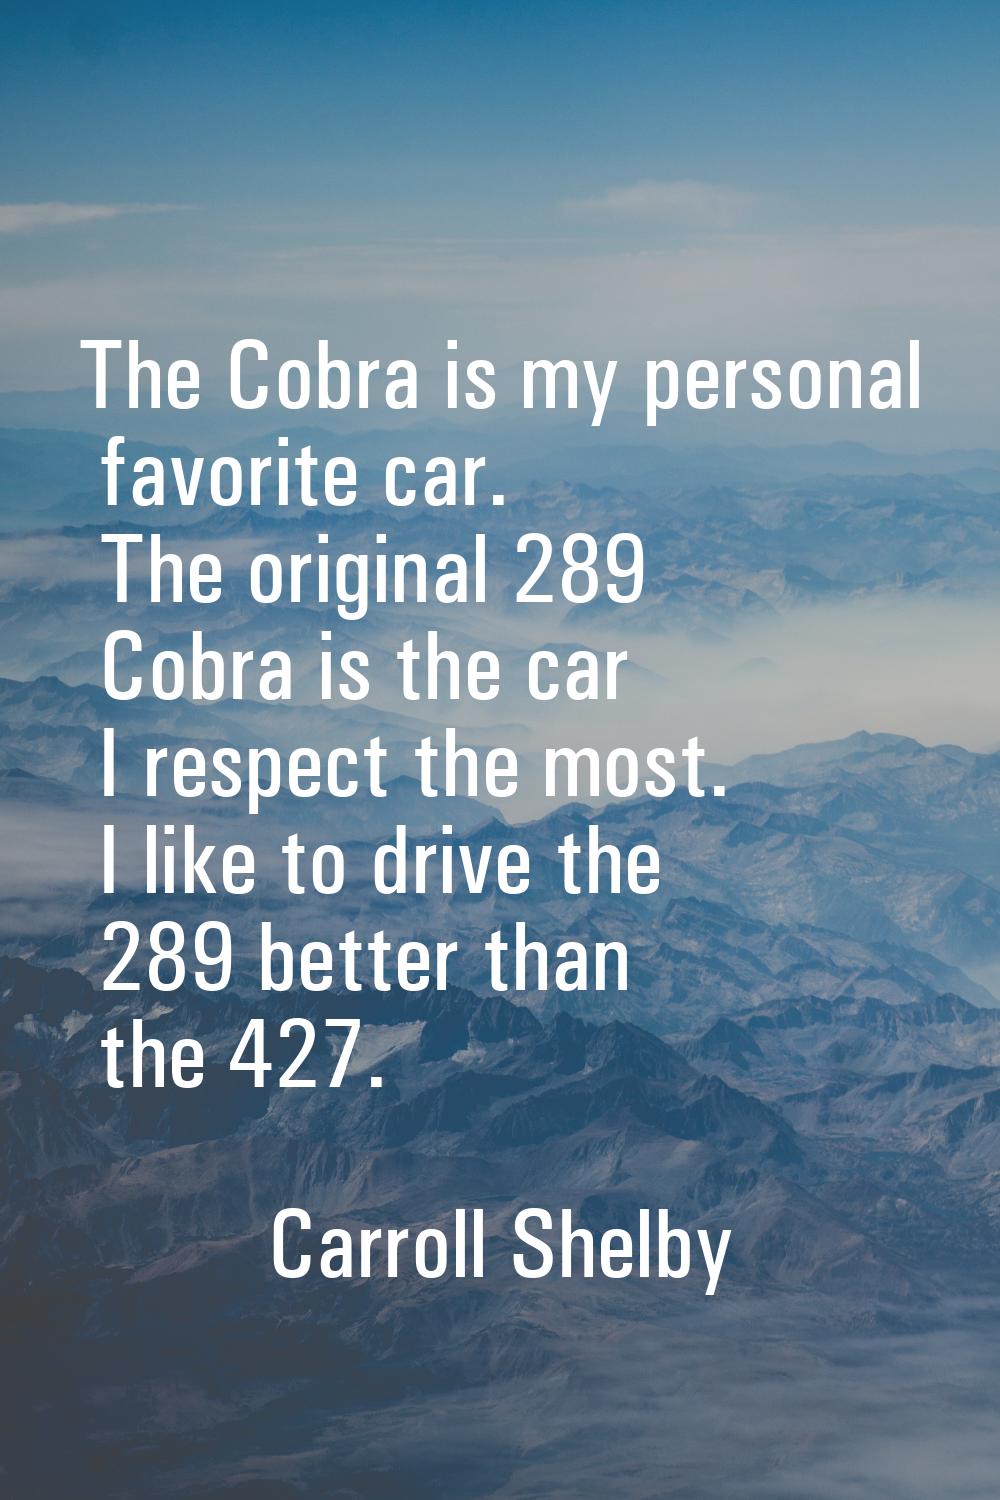 The Cobra is my personal favorite car. The original 289 Cobra is the car I respect the most. I like